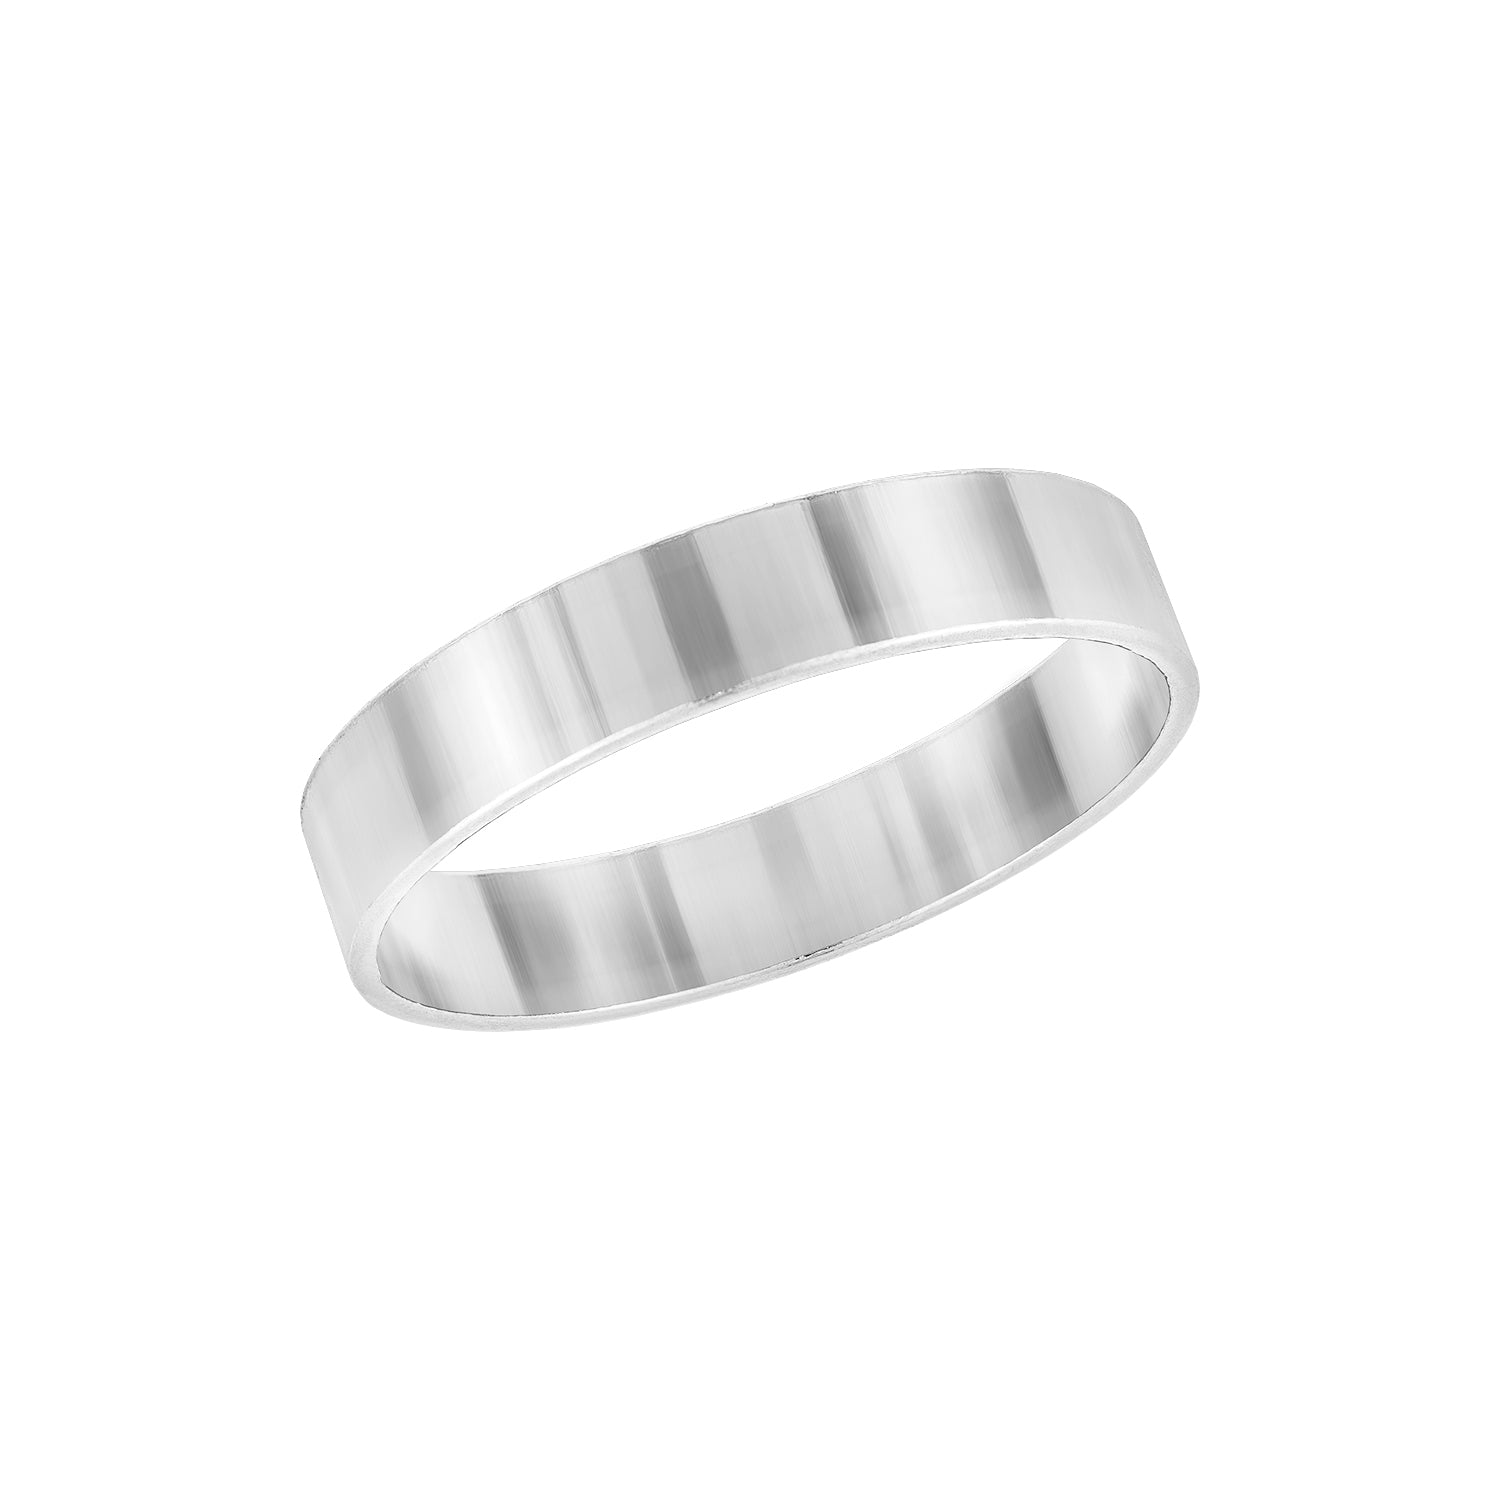 J&CO Jewellery Thick Stacking Ring